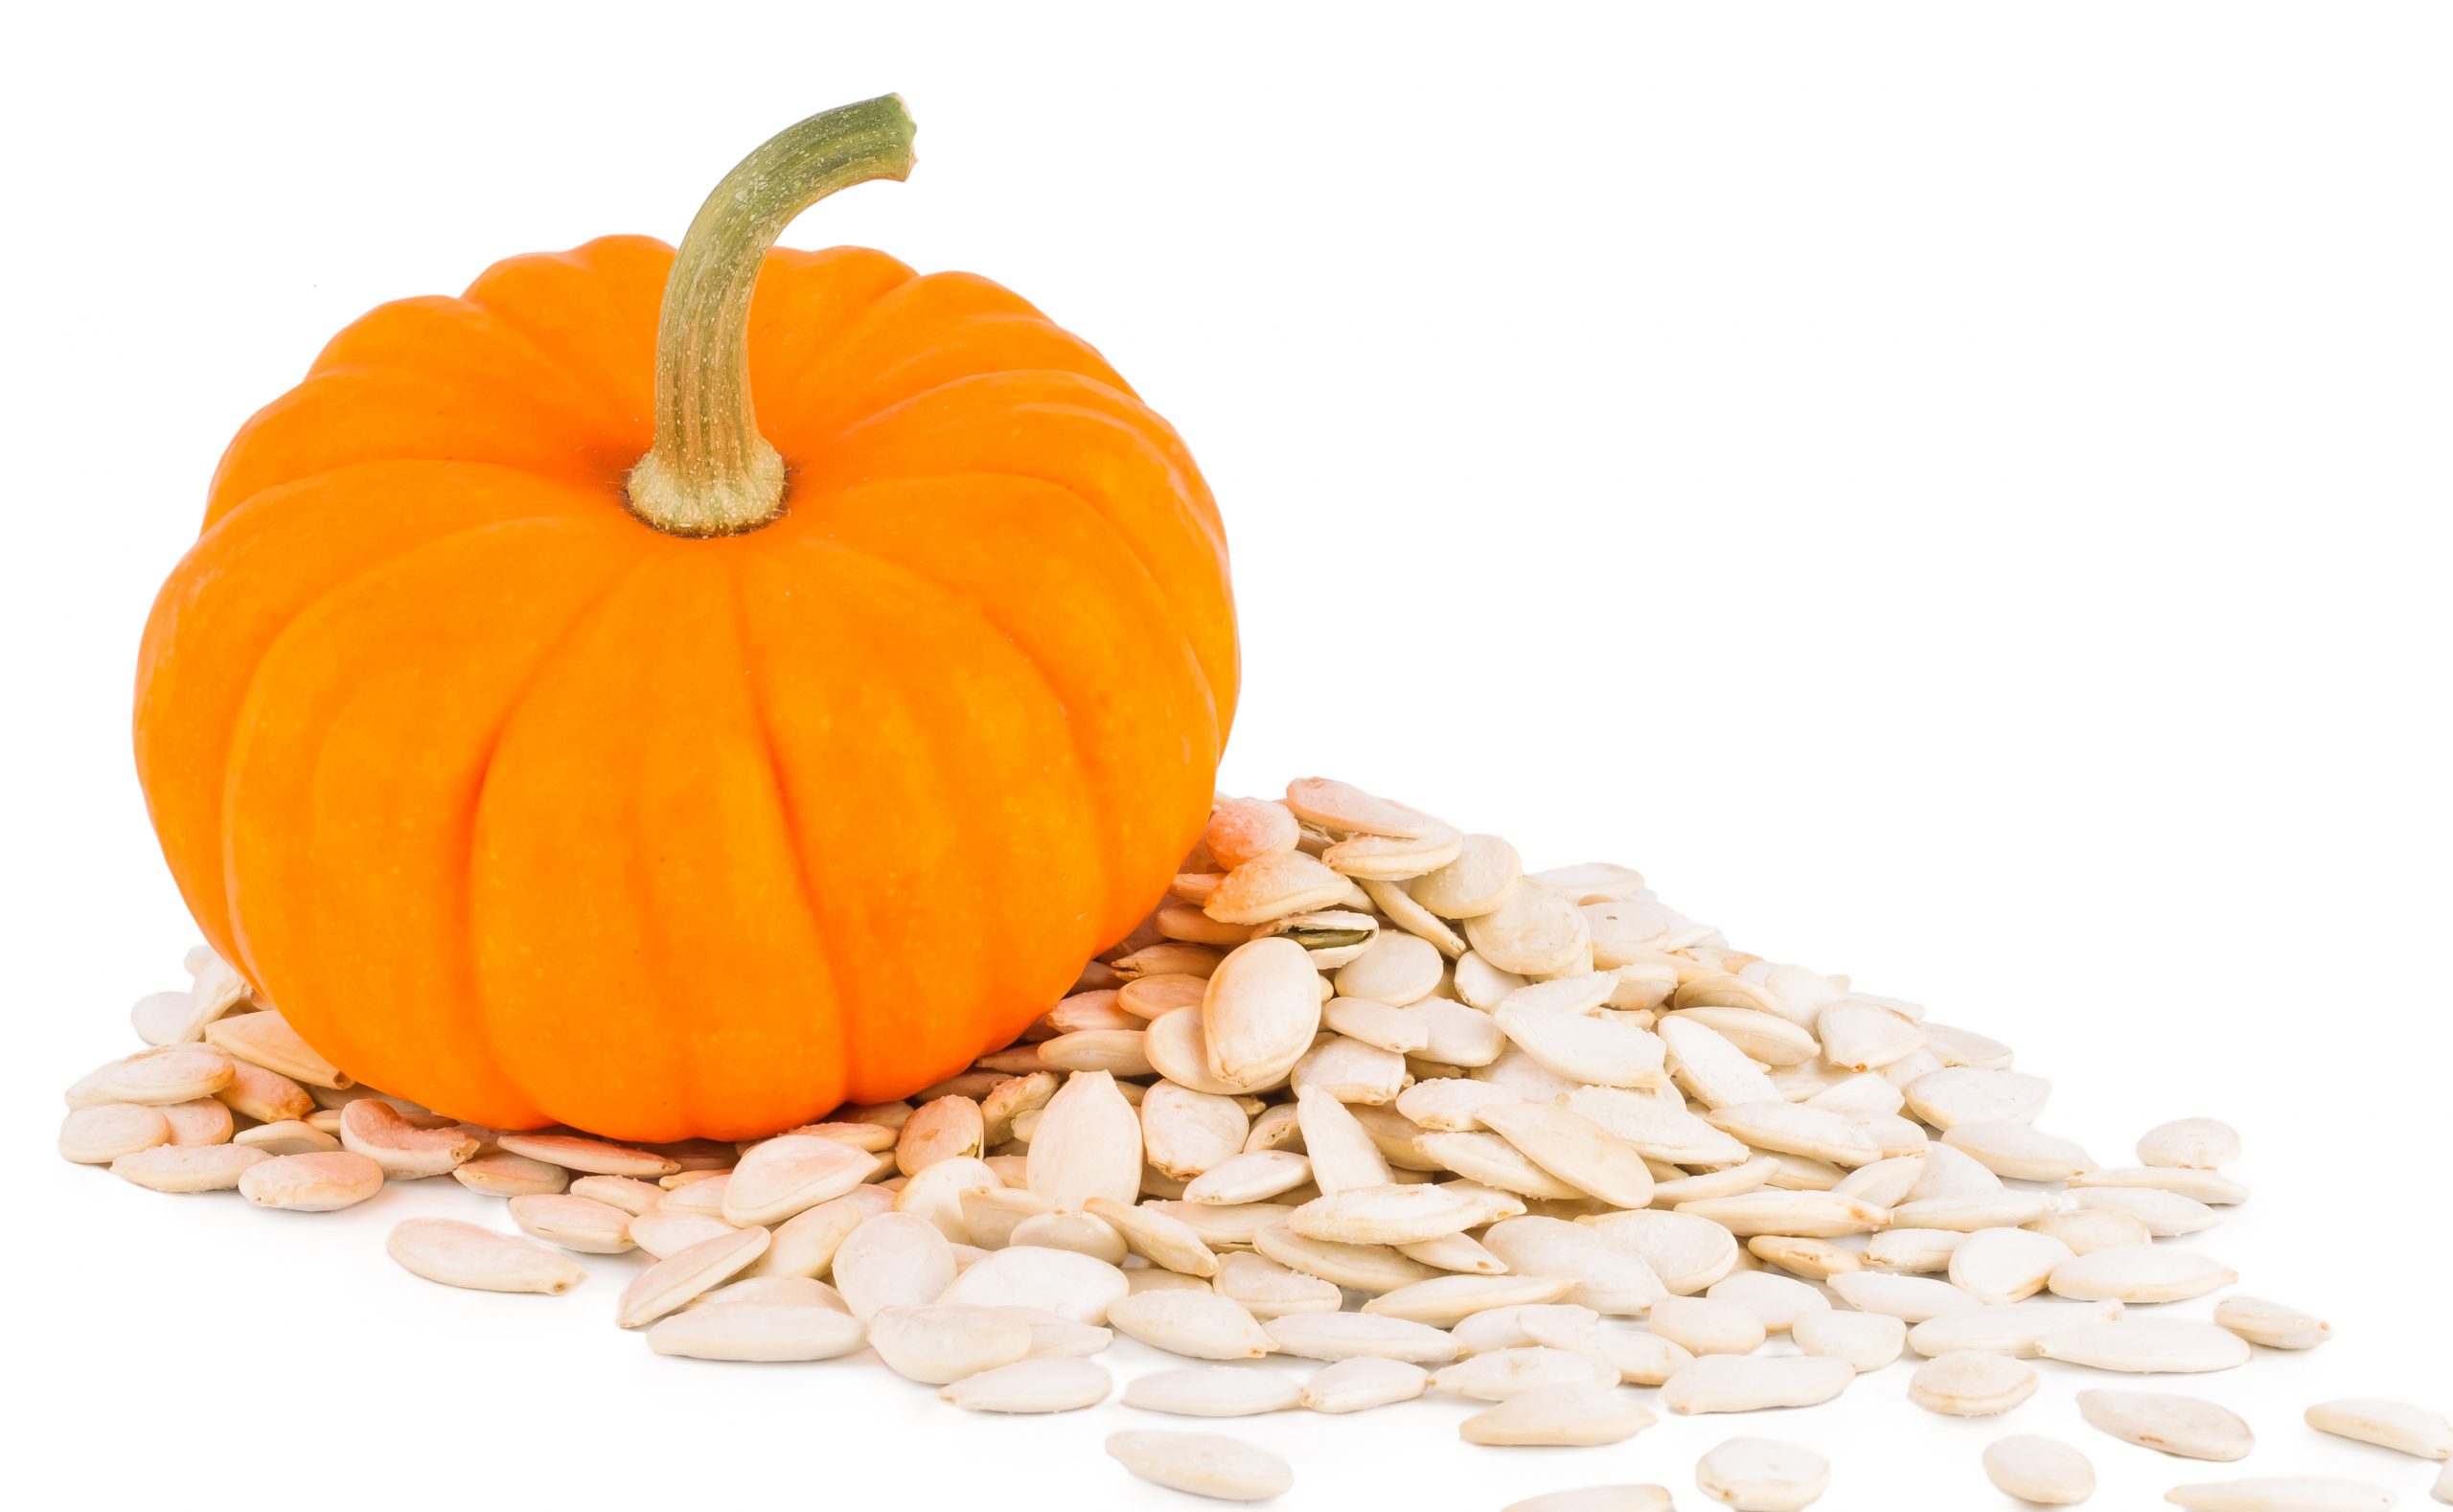 VIDEO: Pumpkin Seed Oil For Hair Loss - The Research